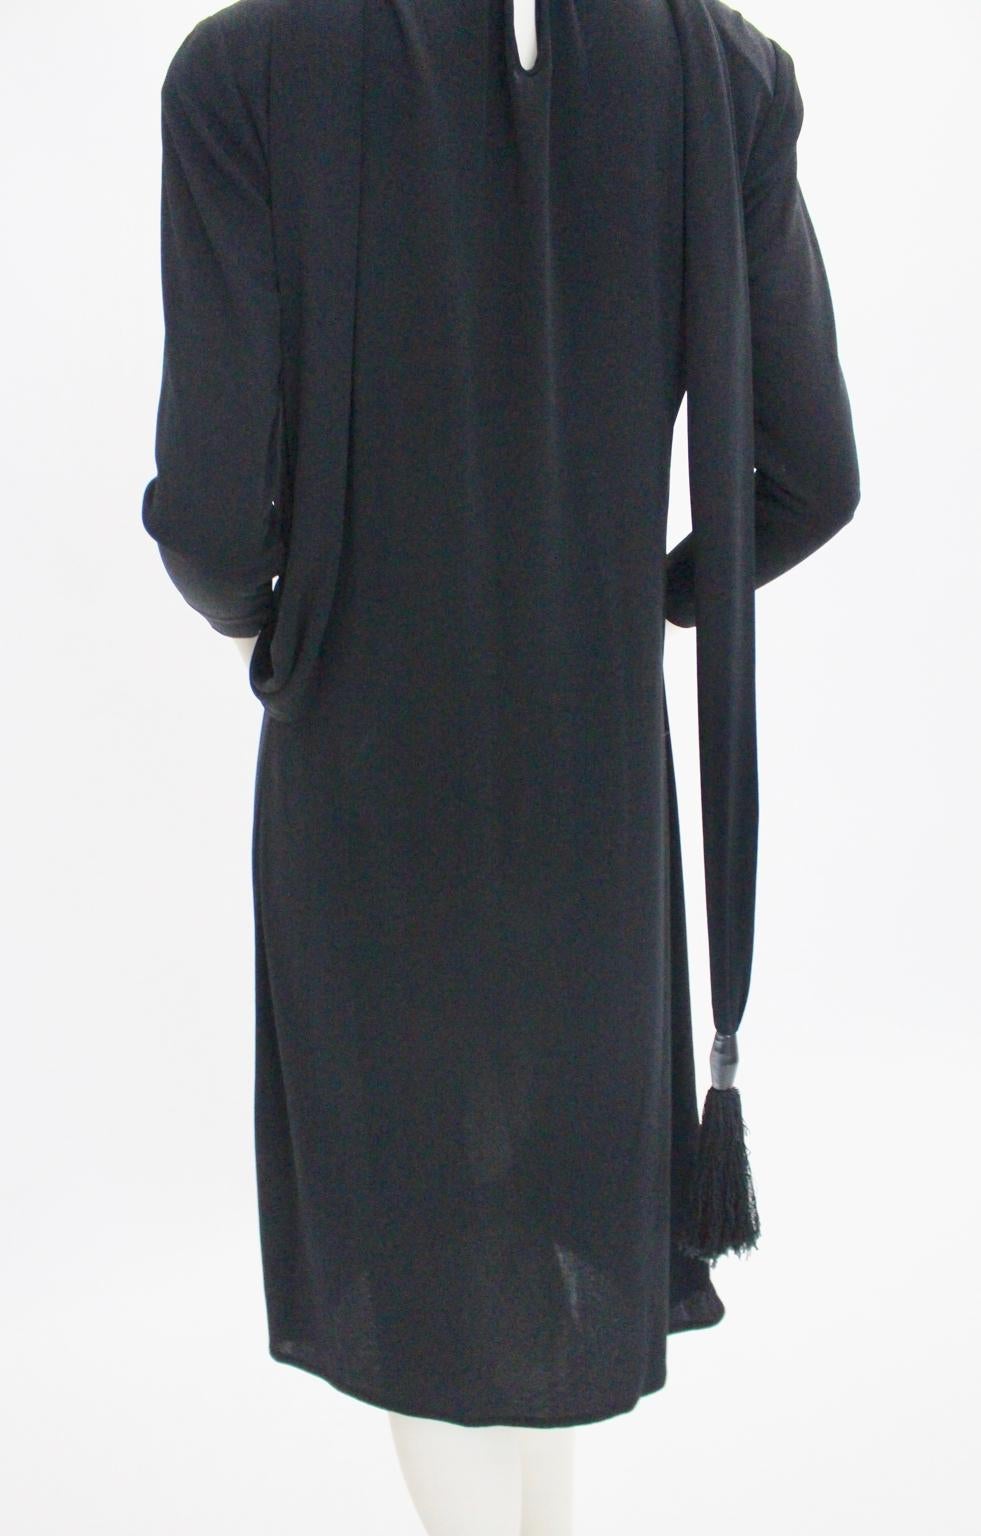 Black Vintage Wrap Evening Dress 1970s Italy For Sale 5